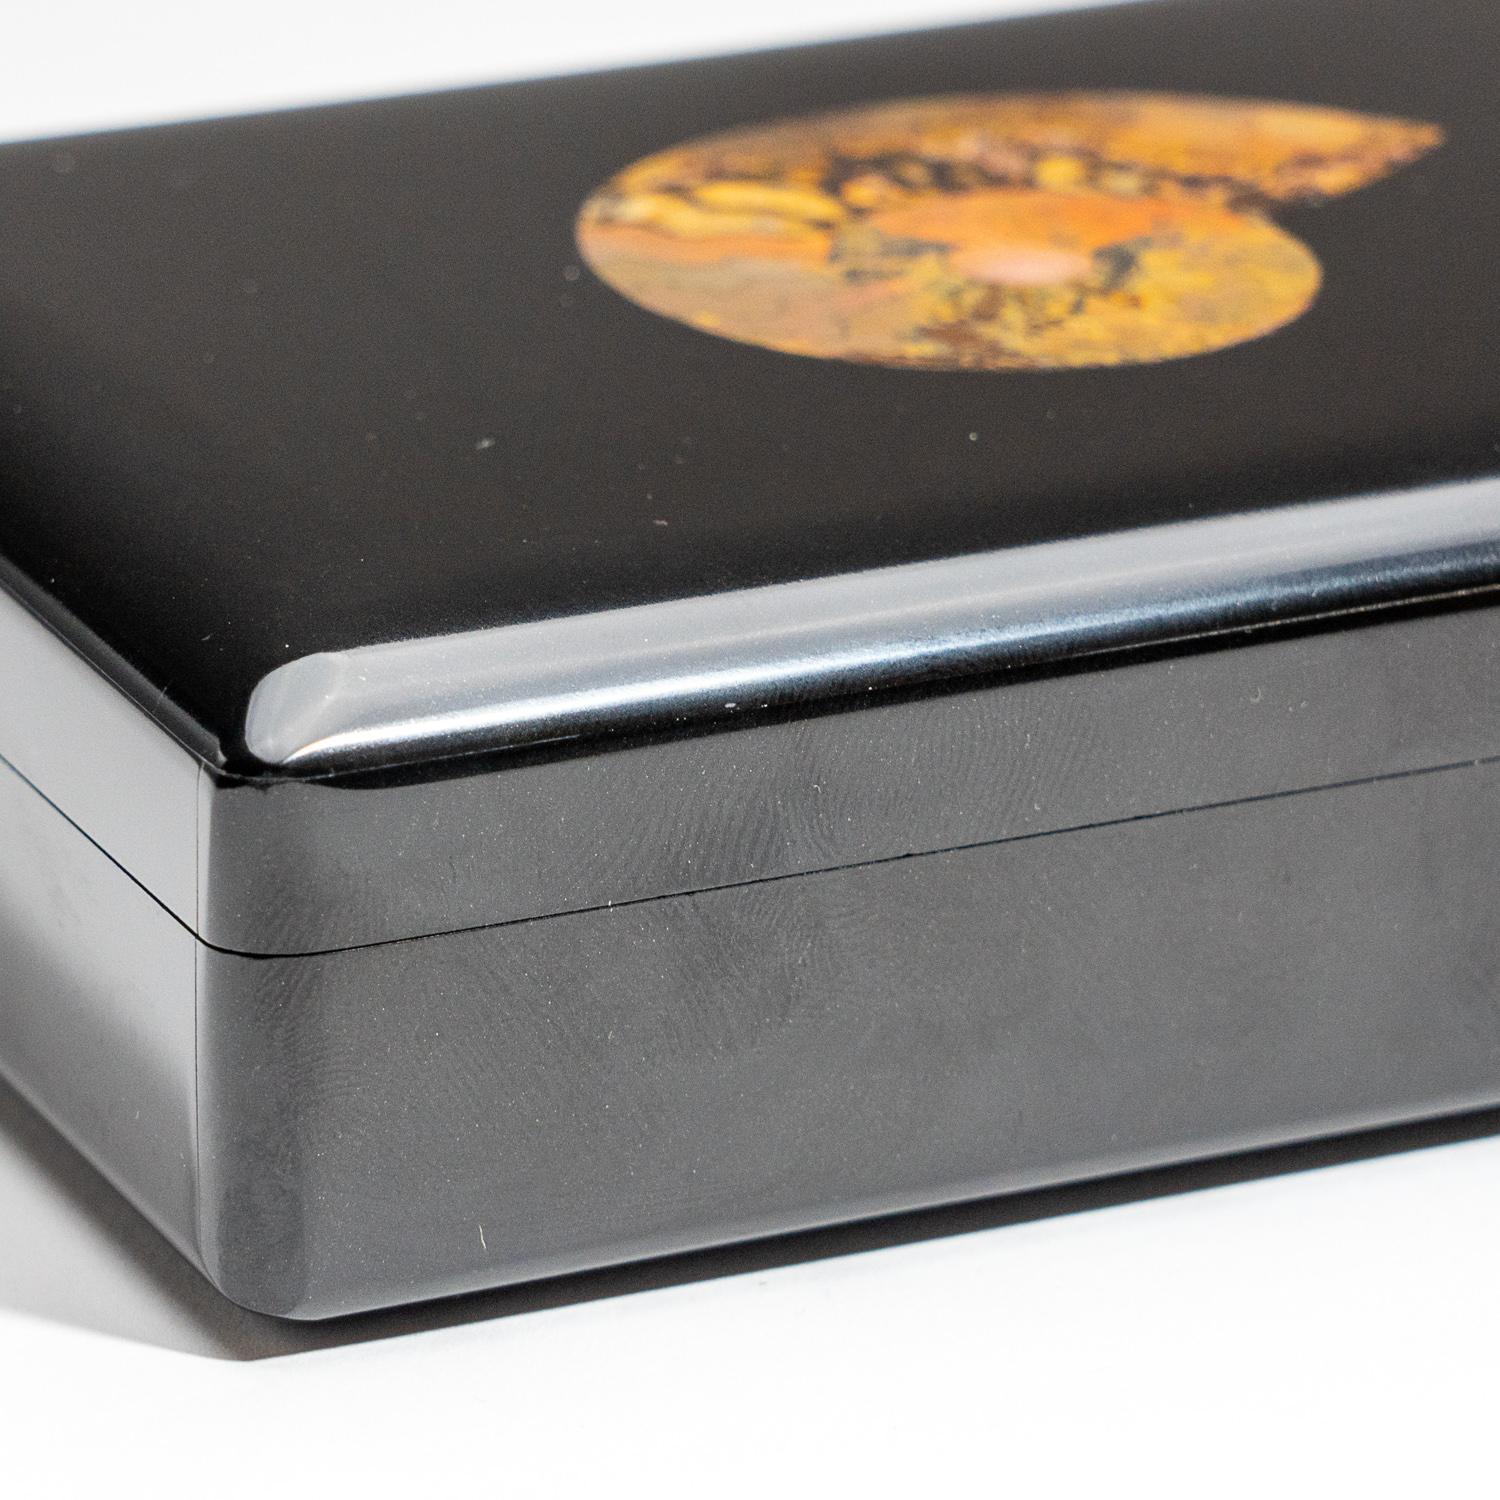 Large rectangle jewelry box handmade from the finest top grade black onyx with rich jet black color and decorated with ammonite fossil. The box has been hand polished to a mirror finish. The lid has a piano hinge opening to reveal a black velvet